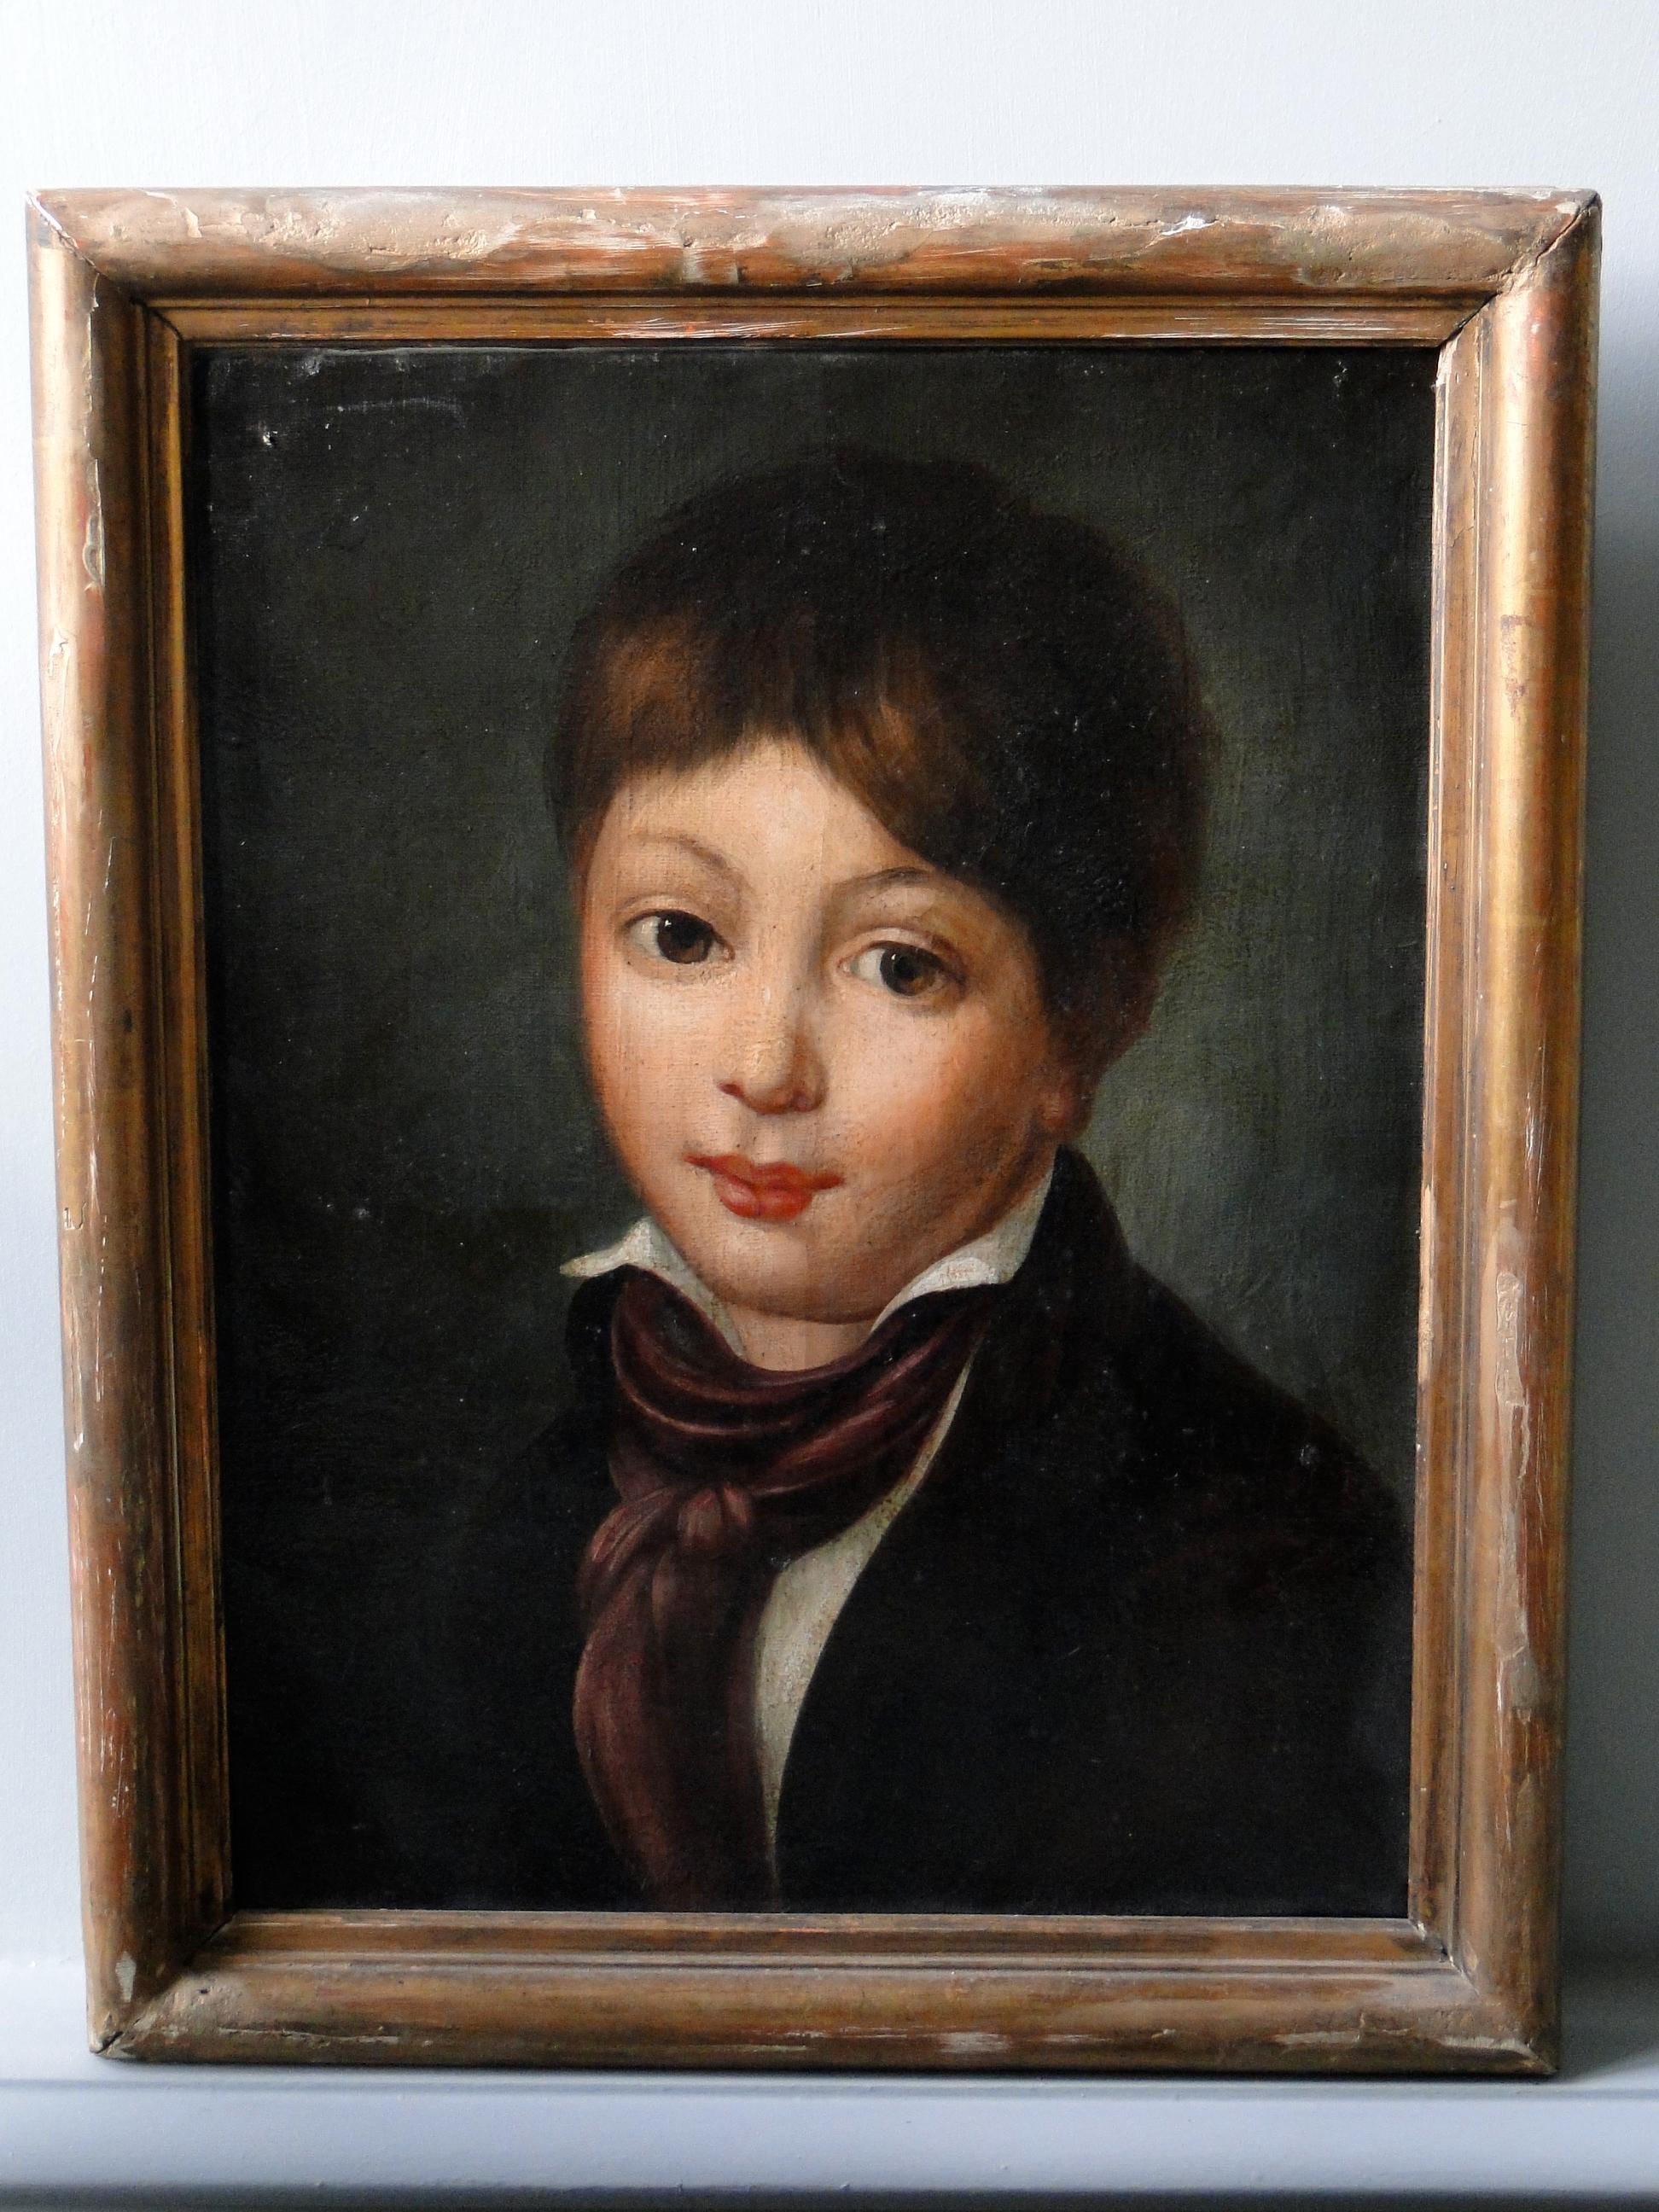 19th century painting on canvas of a boy. Gilded frame.